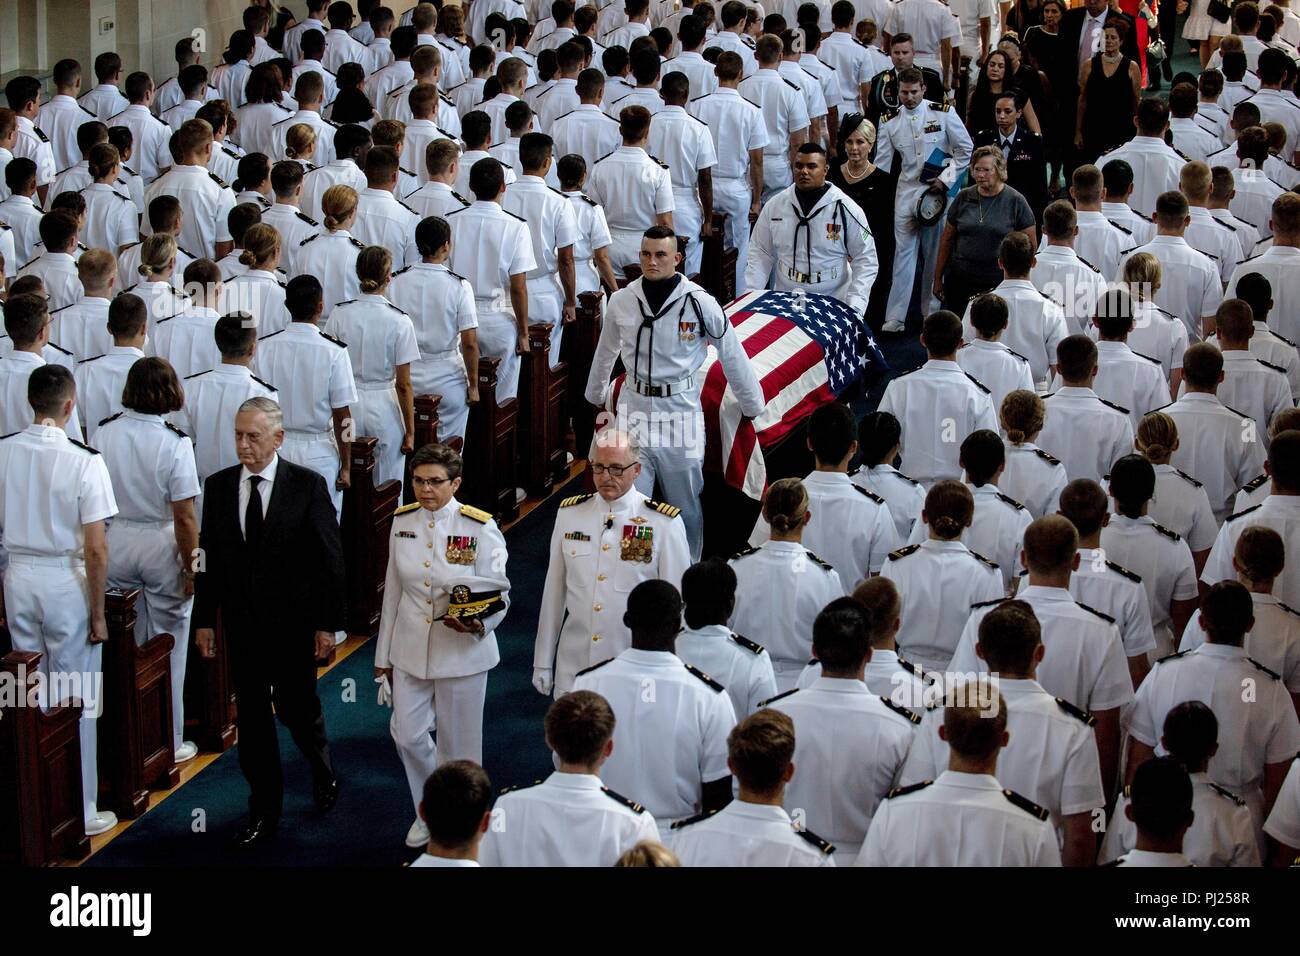 U.S Secretary of Defense James Mattis leads the procession of flag draped casket of Sen. John McCain and his family following the memorial service at the United States Naval Academy Chapel September 2, 2018 in Annapolis, Maryland. John S. McCain, III graduated from the United States Naval Academy in 1958. He was a pilot in the United States Navy, a prisoner of war in Vietnam, a Congressmen and Senator and twice presidential candidate. He received numerous awards, including the Silver Star, Legion of Merit, Purple Heart, and Distinguished Flying Cross. Stock Photo